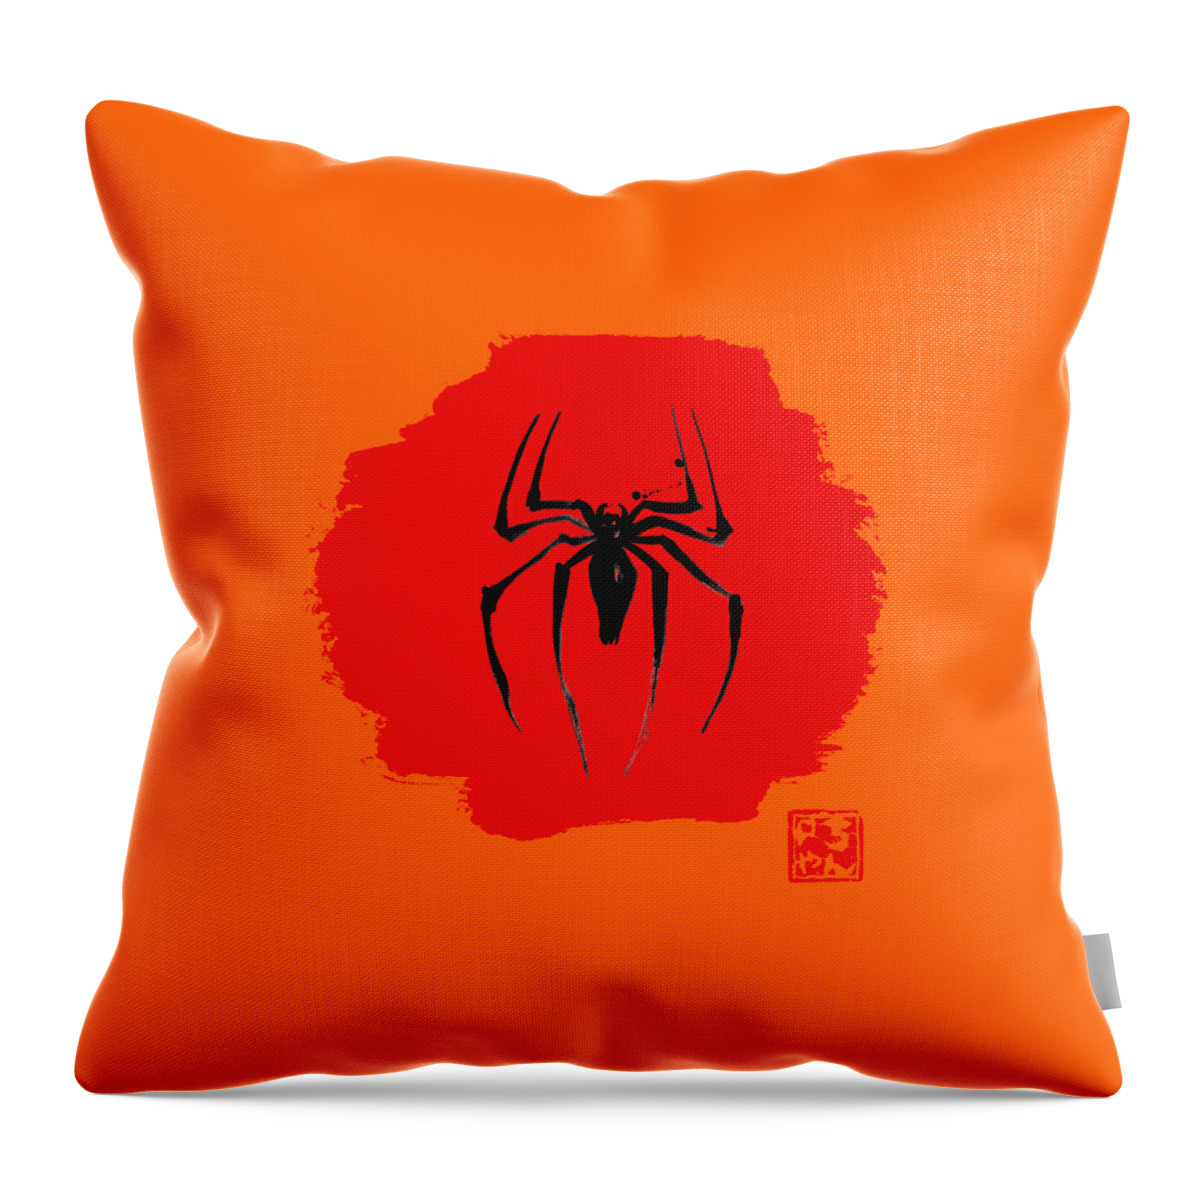 Spider Throw Pillow featuring the drawing Spider Red by Pechane Sumie